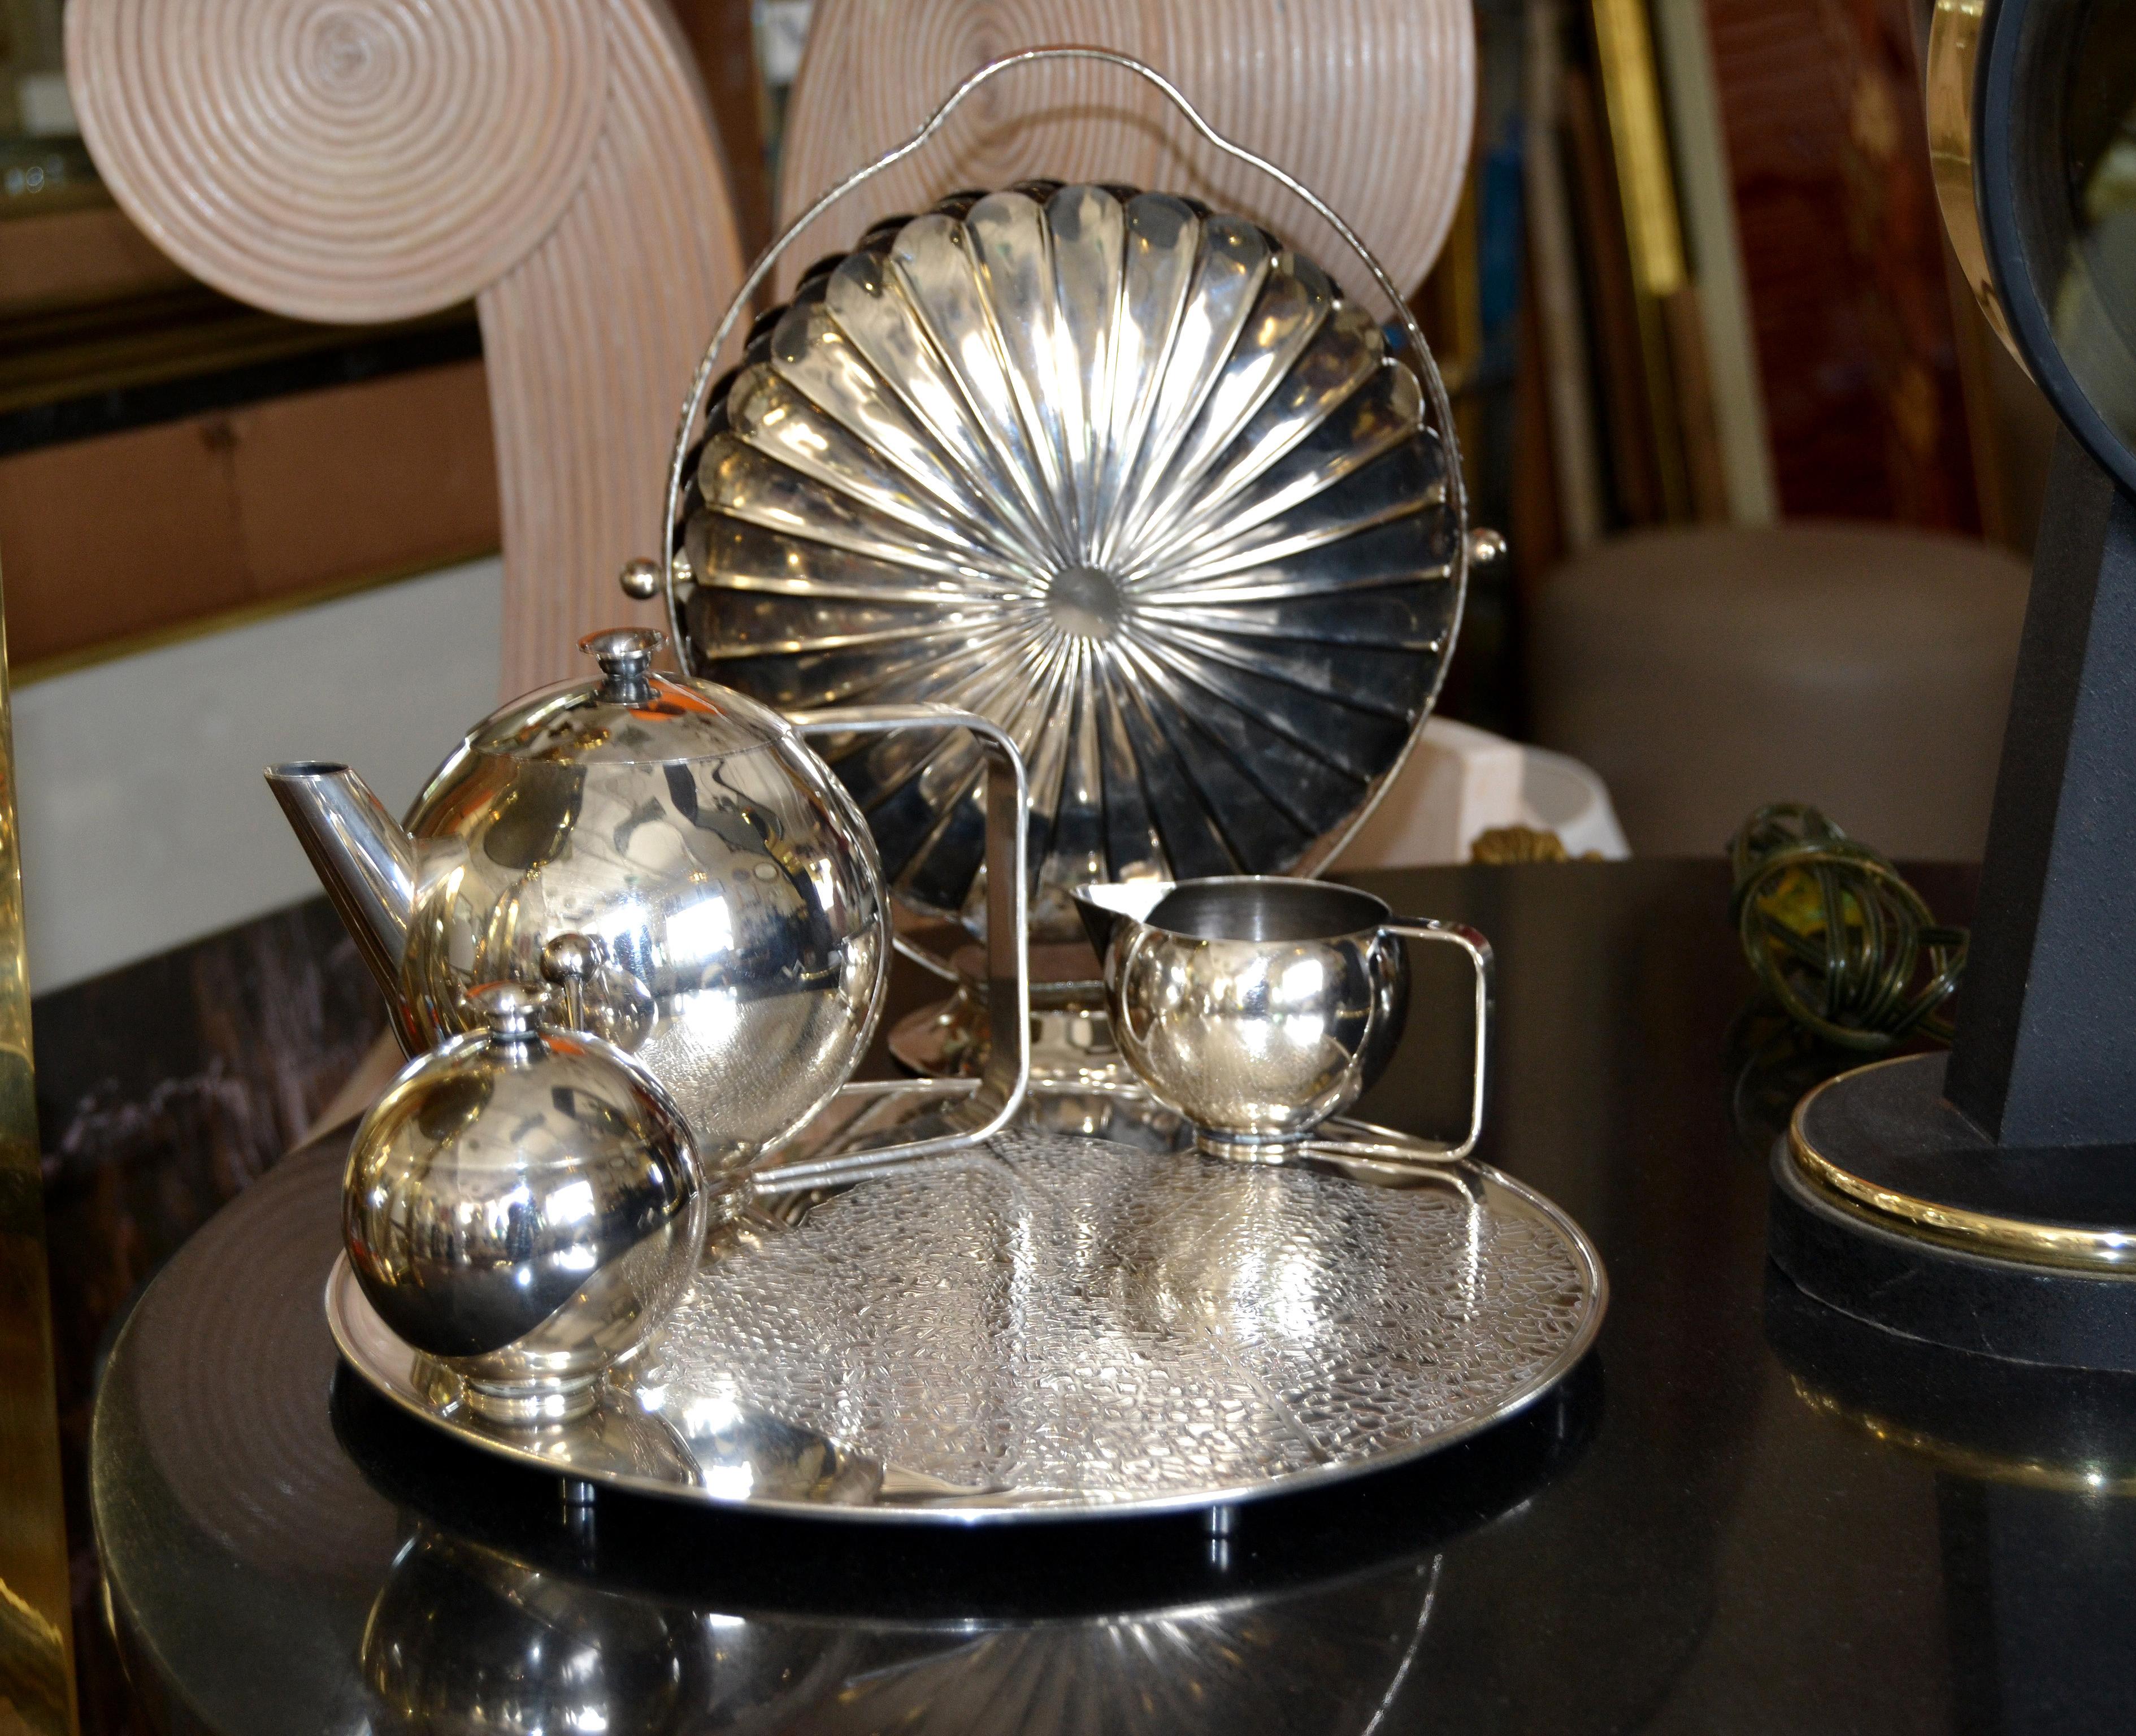 Old English silver plate six pieces tea / coffee service on a round tray.
All marked R-MET and the decorative 3-tier tray with made in England.
Round serving tray has 10.75 inches diameter and is 1.63 inches high.
The teapot measure 5 inches high